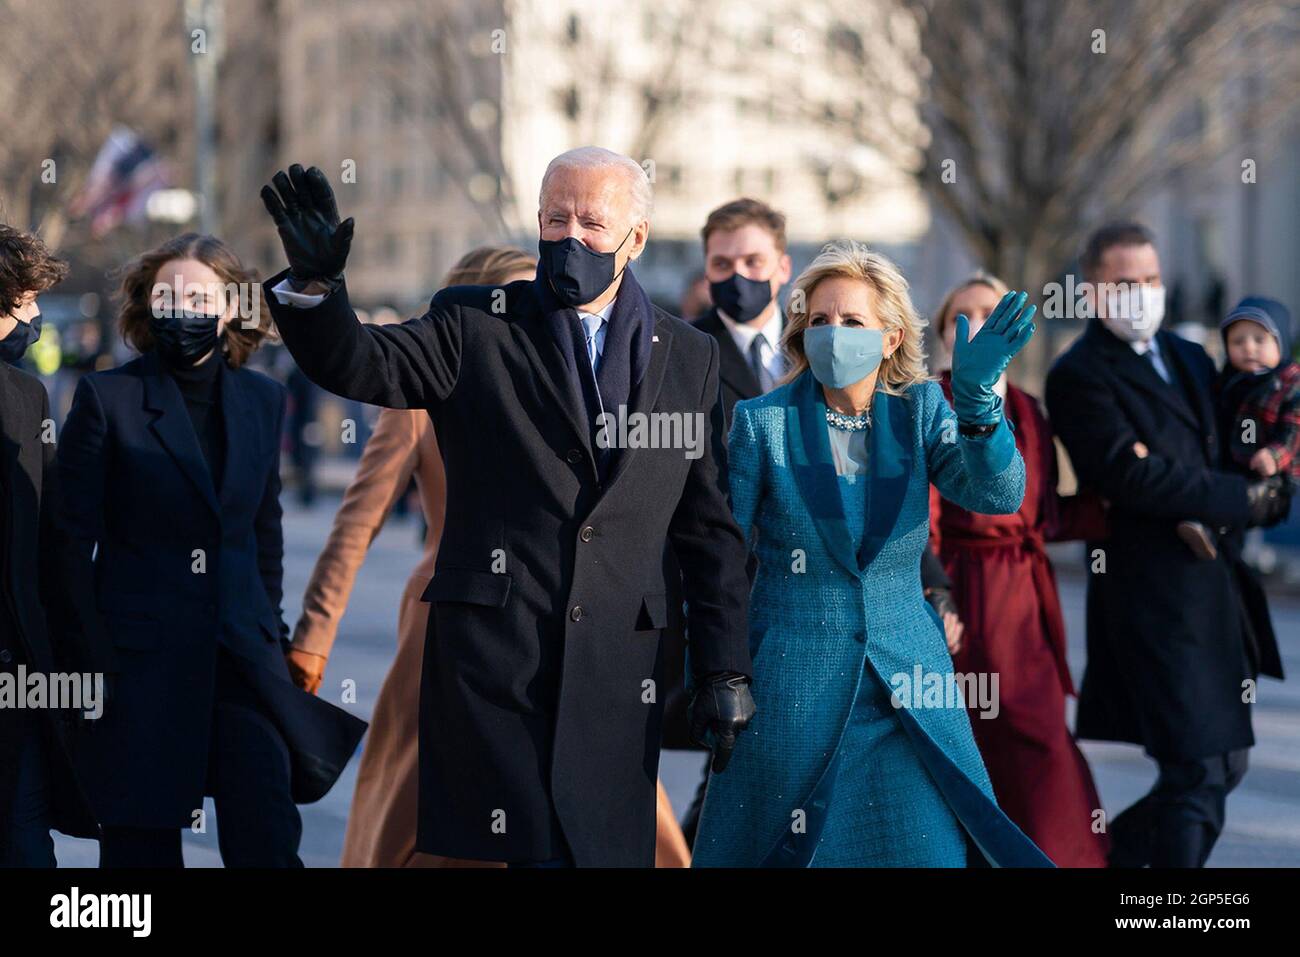 President Joe Biden and First Lady Jill Biden wave as they walk along Pennsylvania Ave. to the White House during the inaugural parade, Jan. 20, 2021  (BSLOC 2021 4 8) Stock Photo